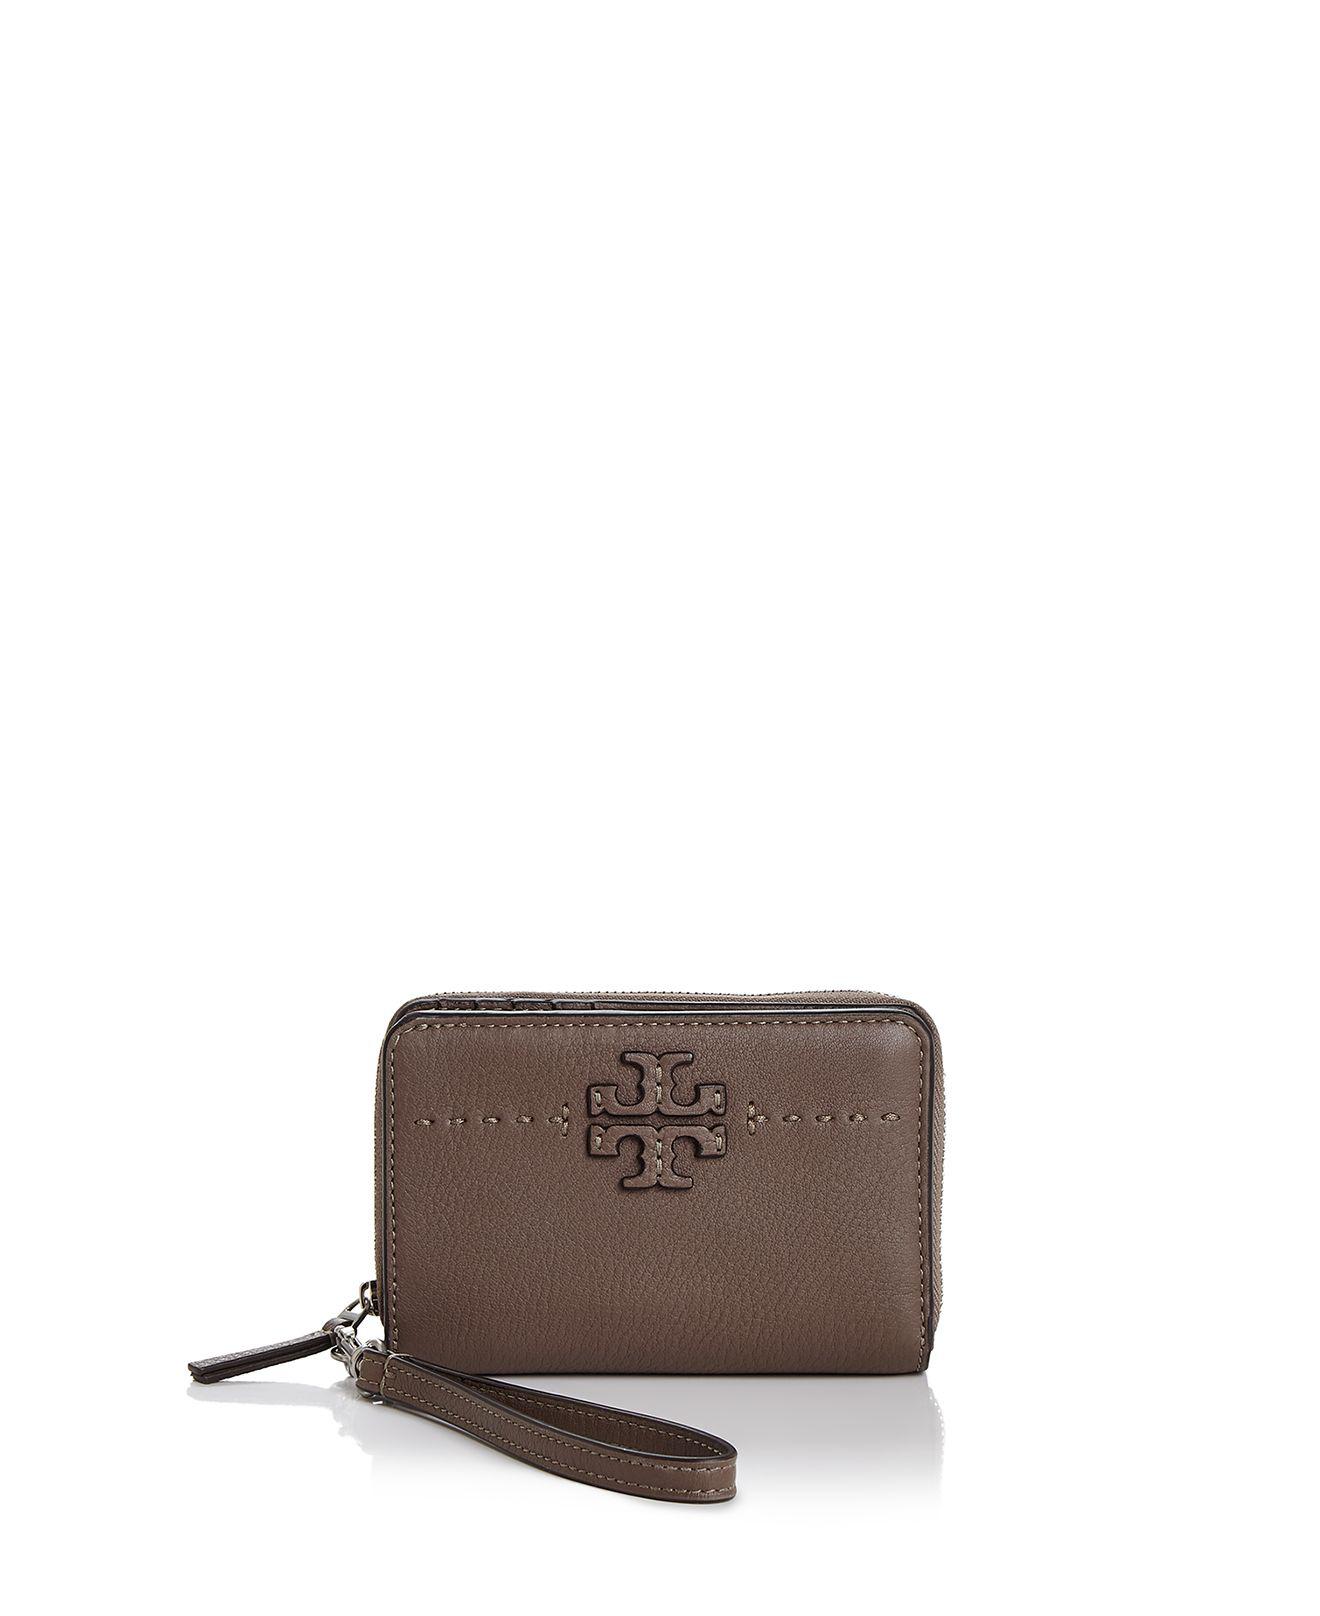 Tory Burch Mcgraw Leather Bifold Wallet - Lyst